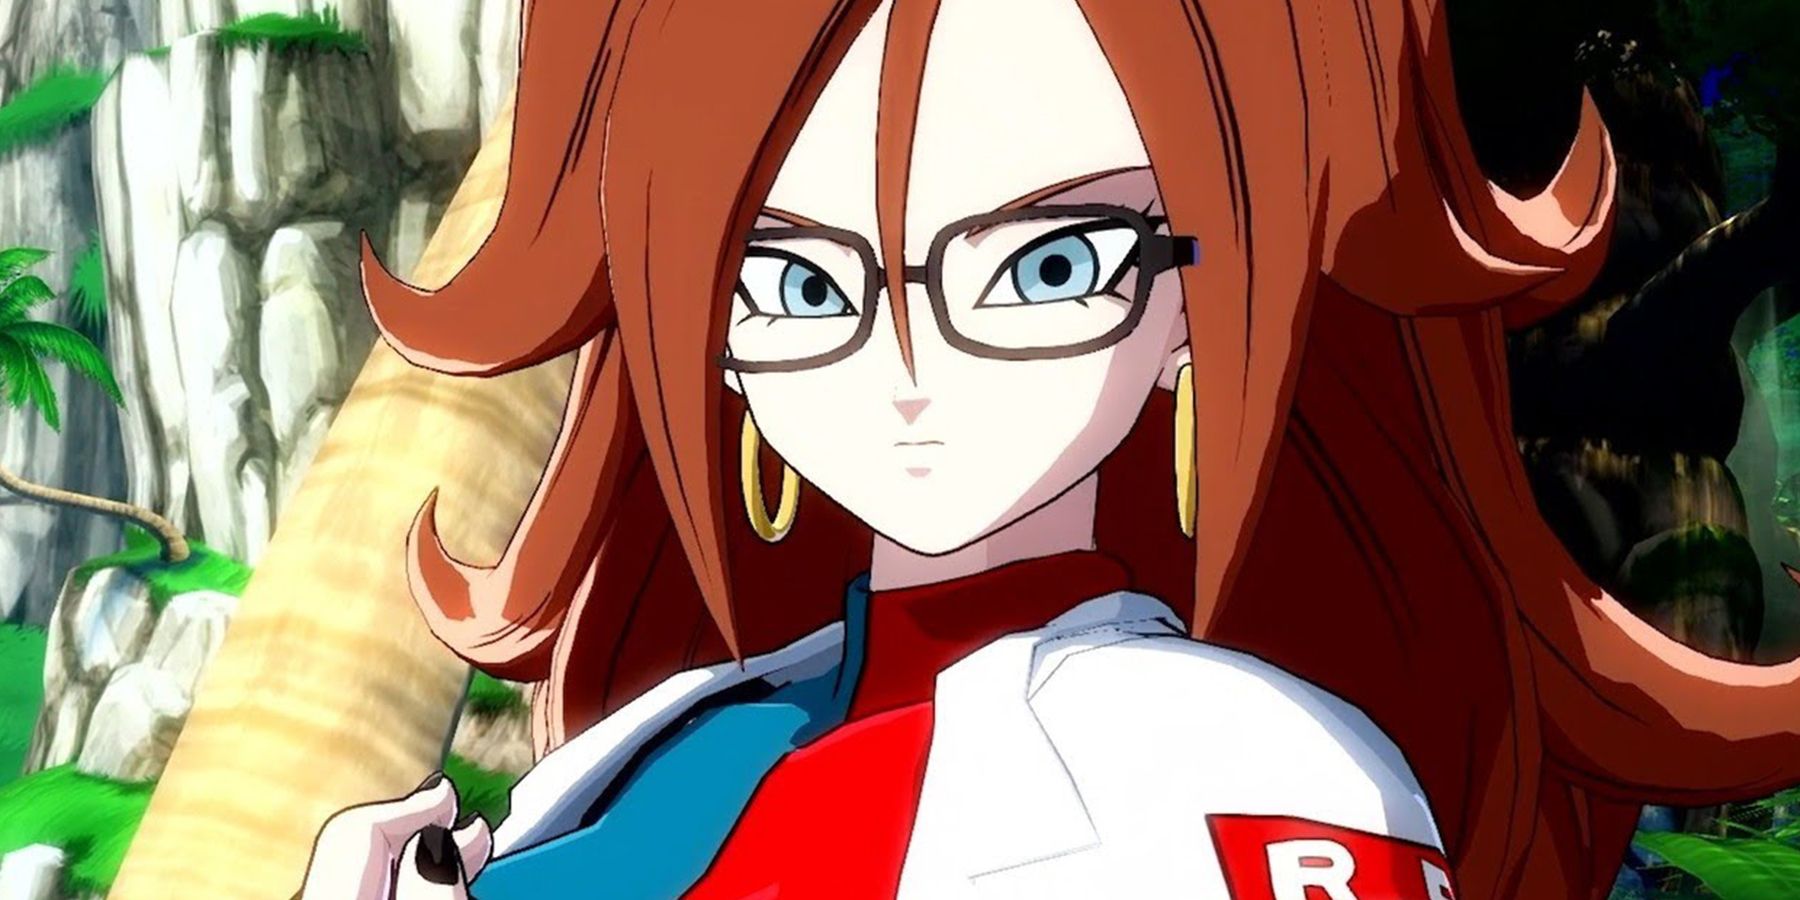 Good Android 21 considers her options in Dragon Ball FighterZ